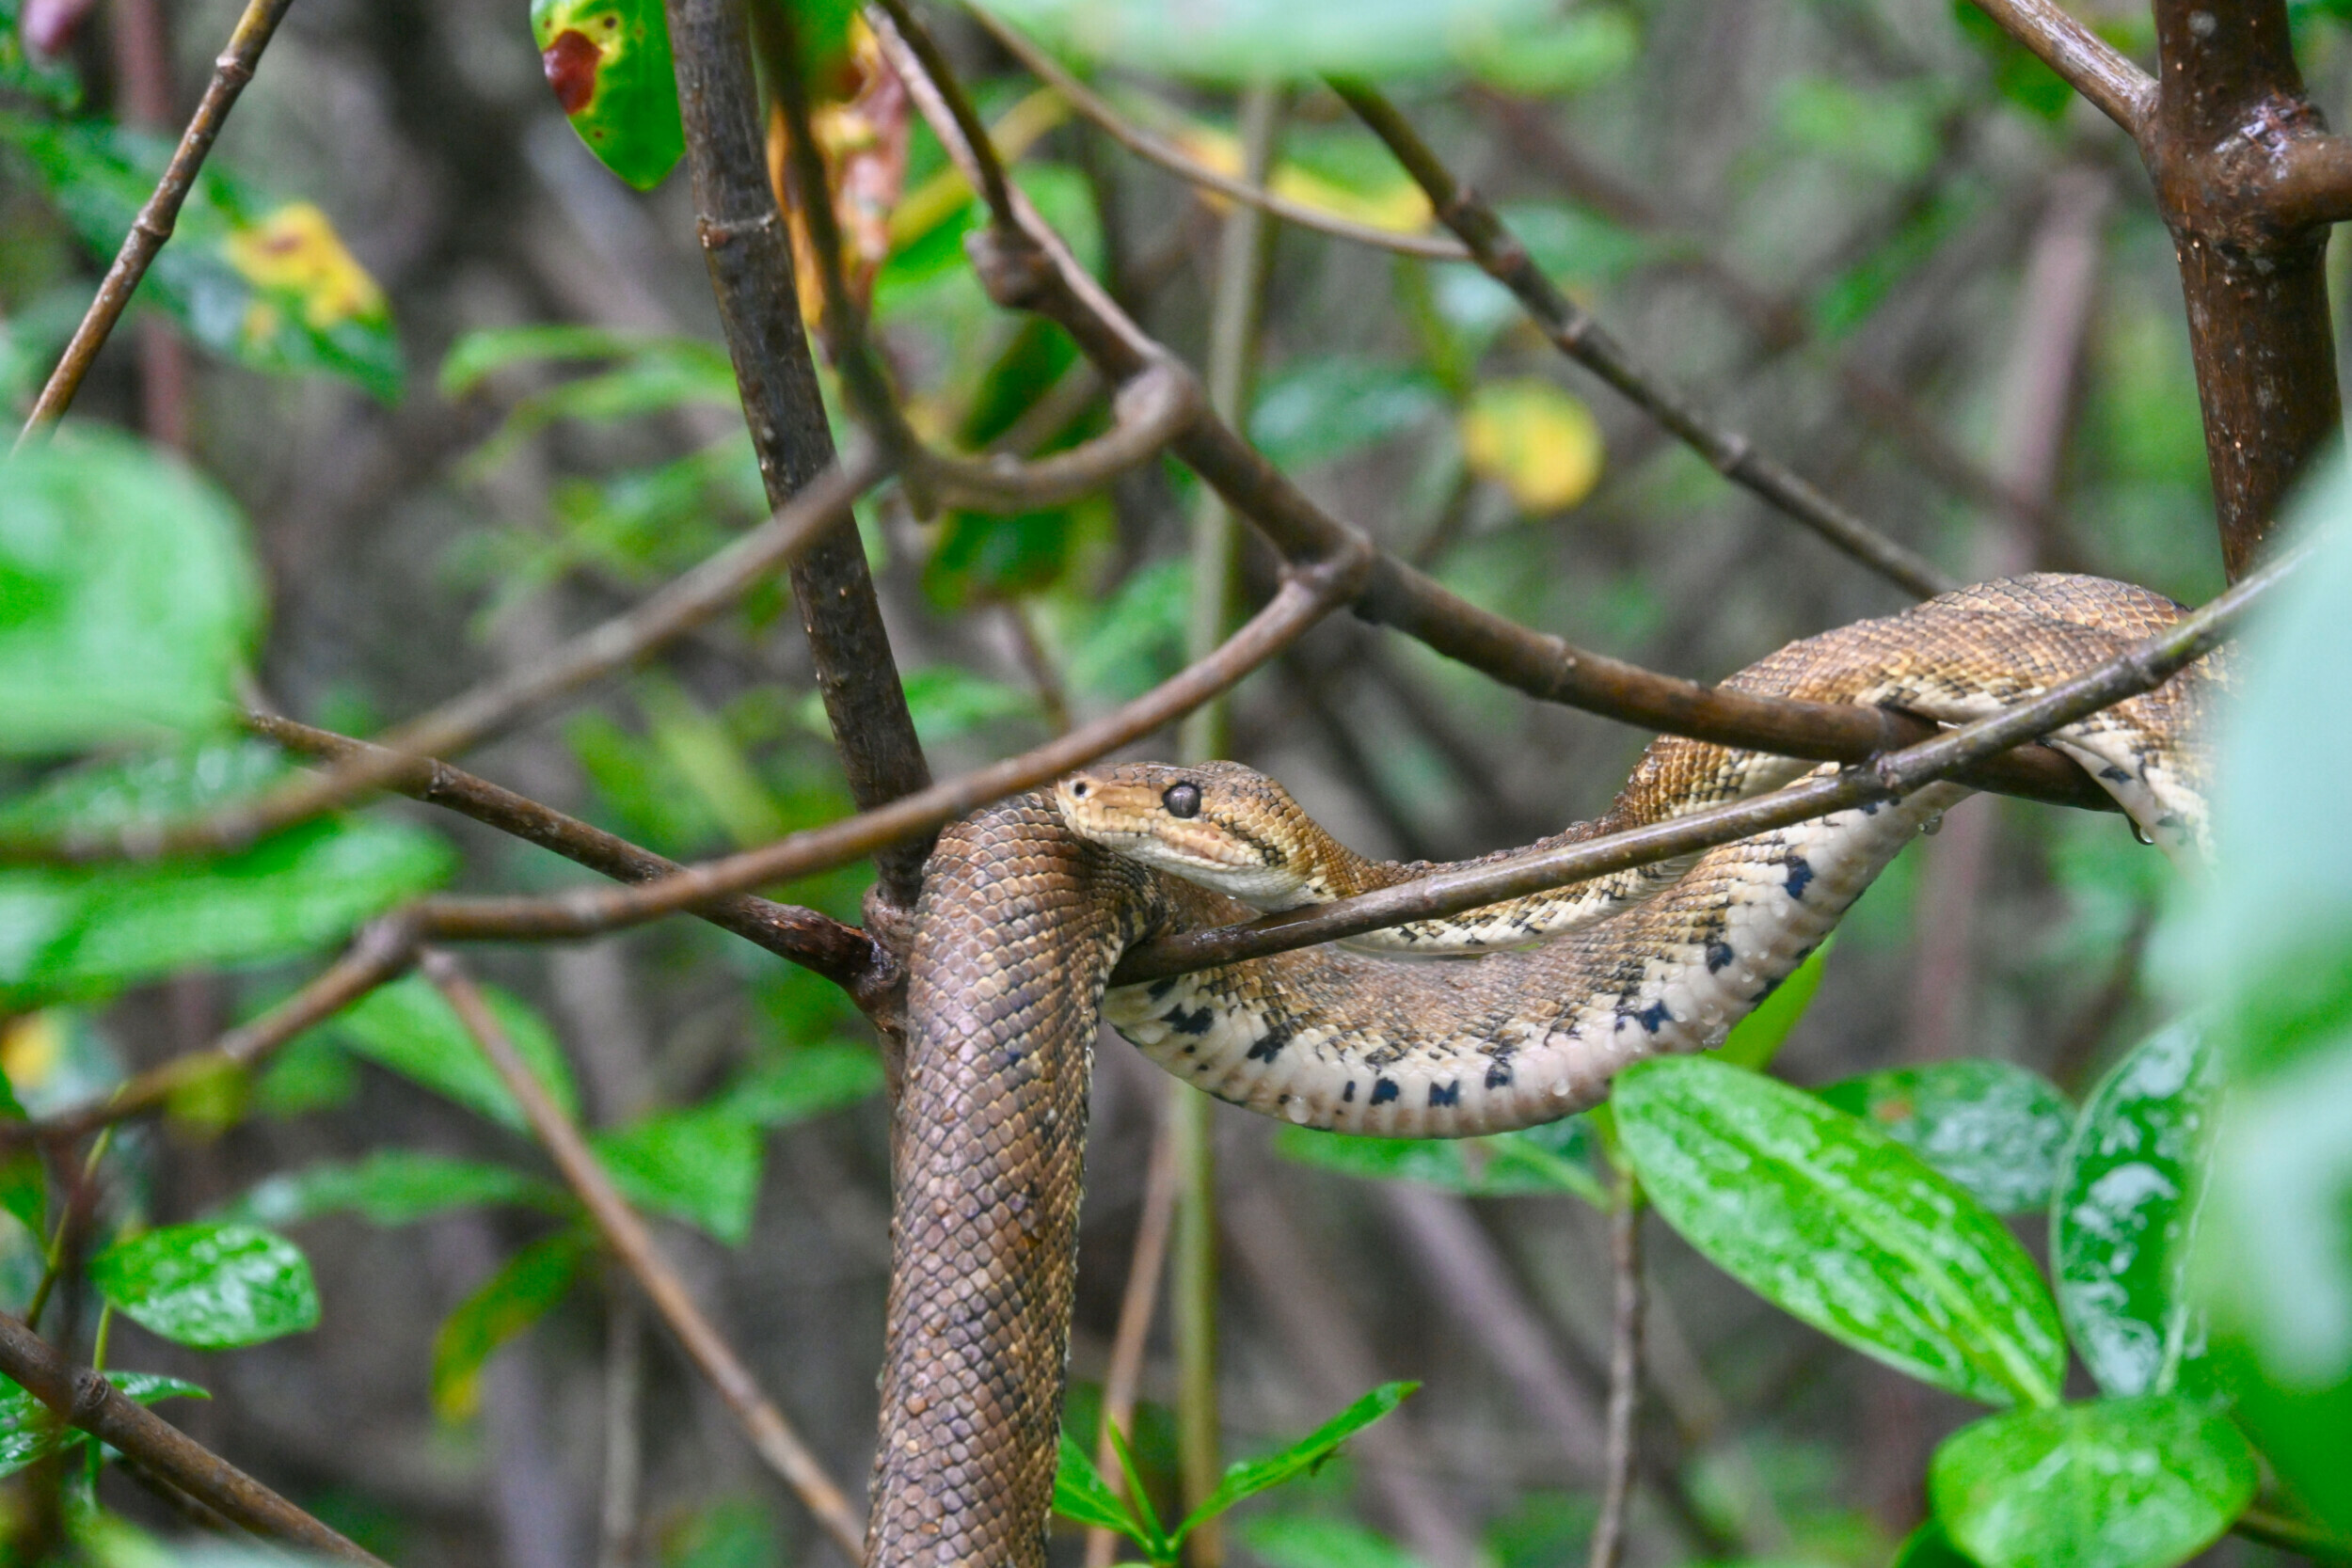 A boa constrictor entwined among branches in the Damas Mangrove near Manuel Antonio National Park.